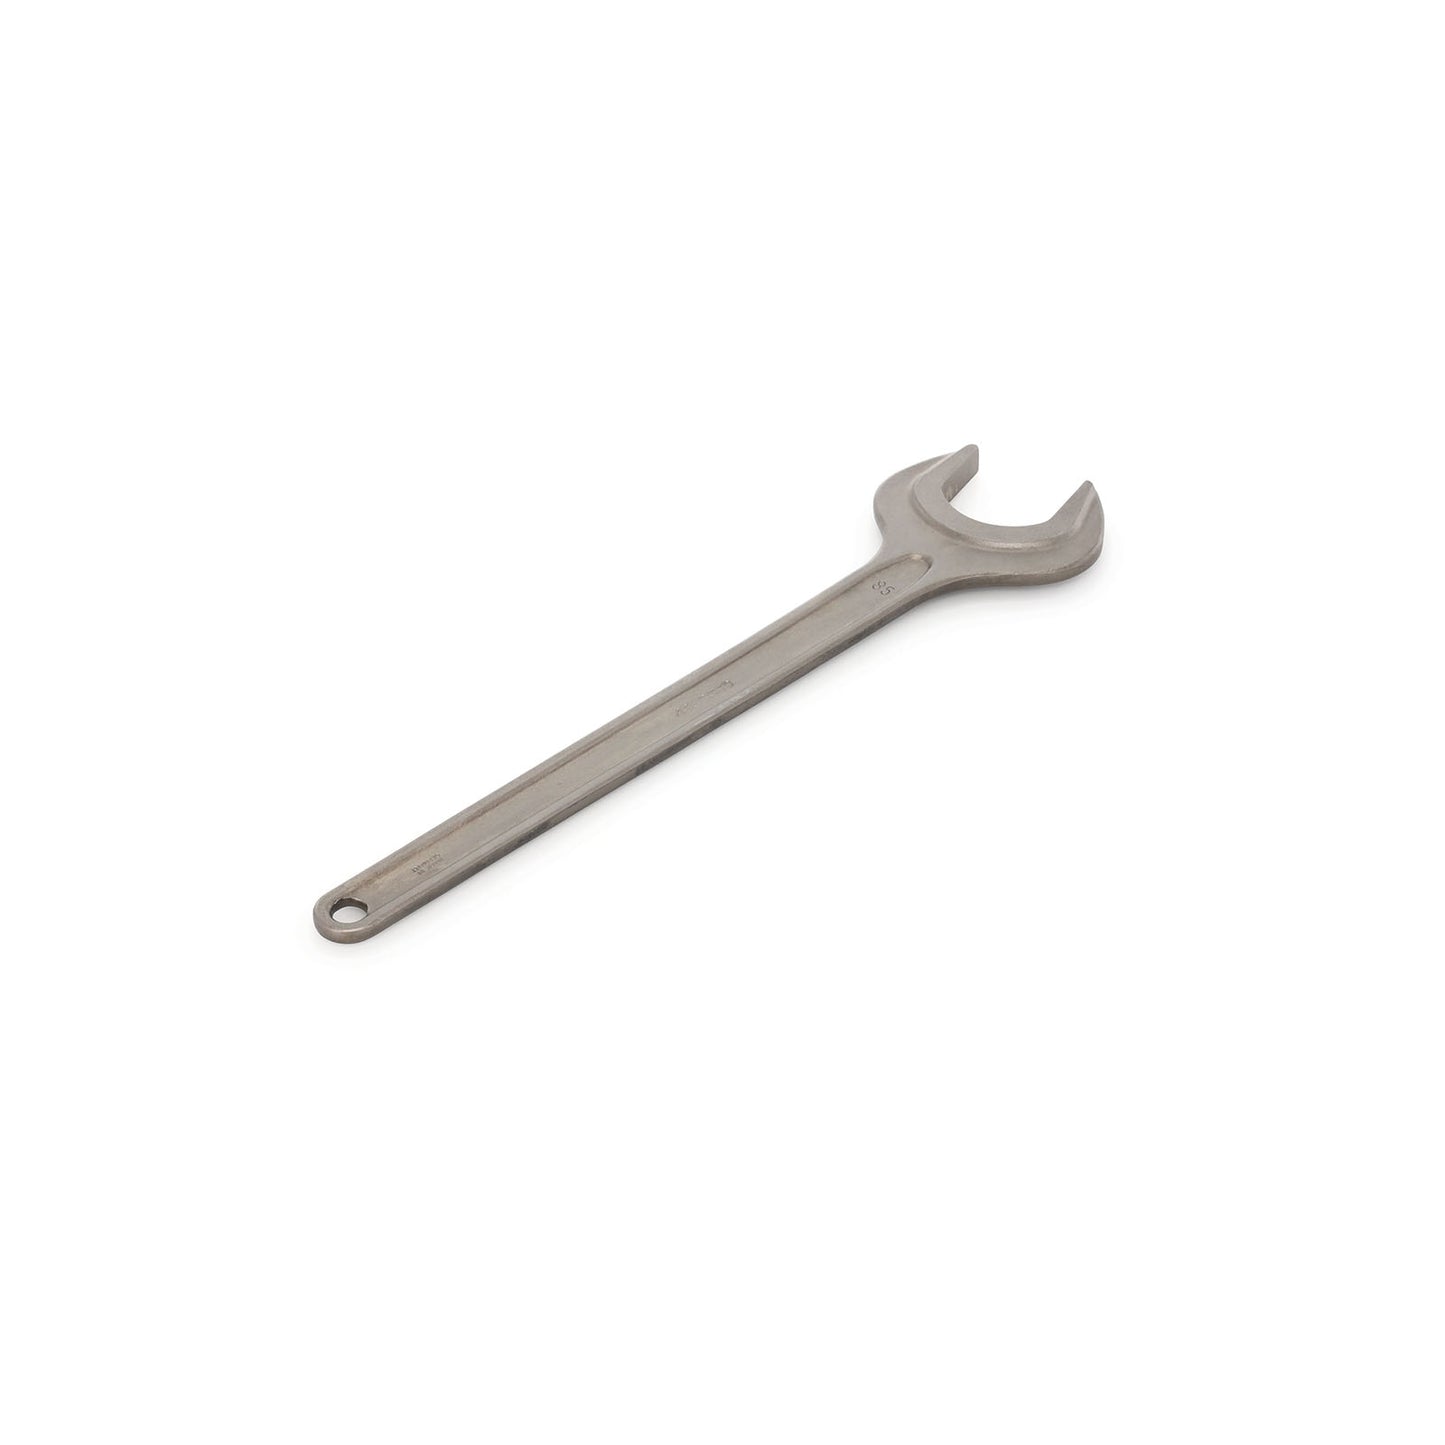 GEDORE 894 85 - 1 Open End Wrench, 85mm (6577940)